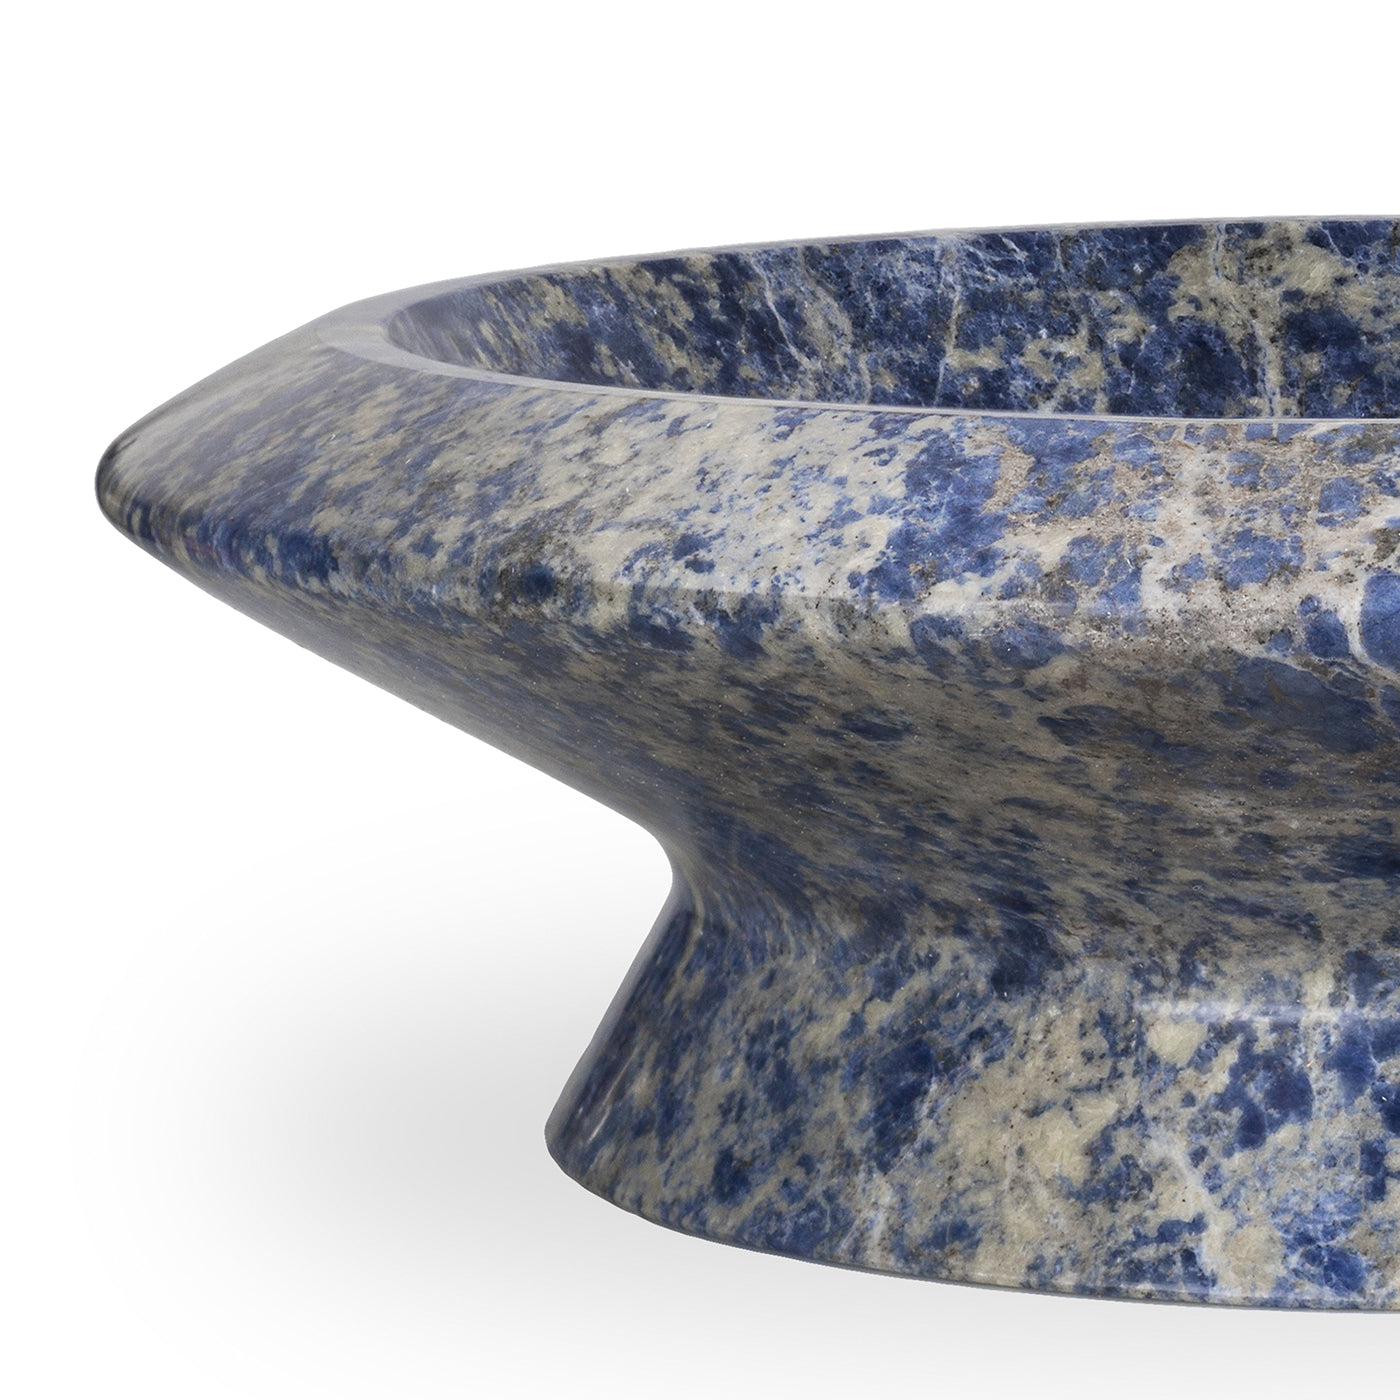 Centerpiece in Blue Sodalite Marble by Ivan Colominas - Alternative view 1